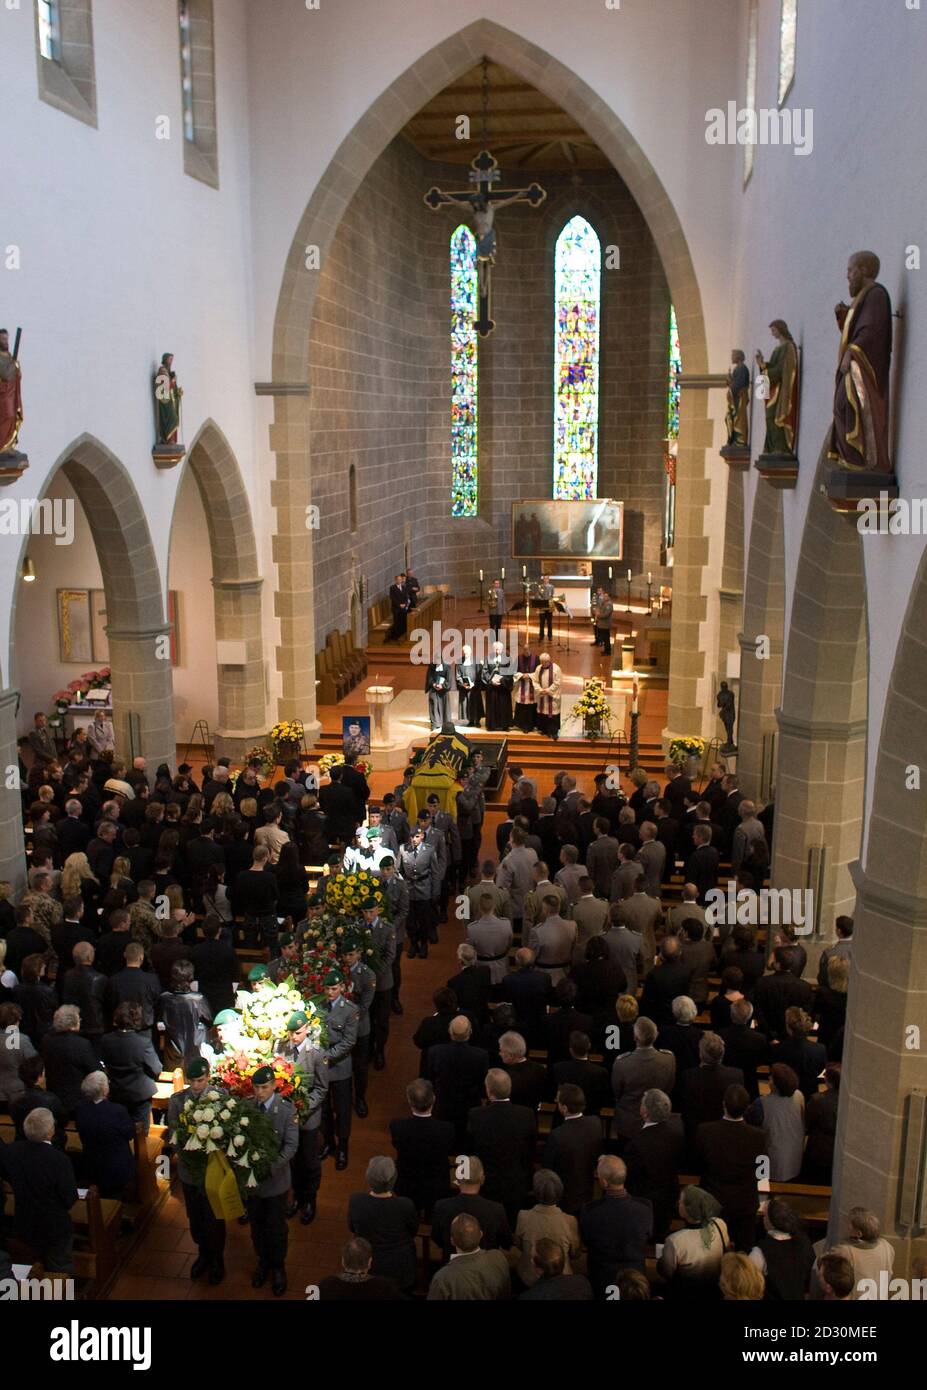 German army Bundeswehr soldiers carry the coffin of killed German Corporal Sergej Motz of the ISAF (International Security Assistance Force) during a memorial service at the Sankt Johannes church in the southwestern German city of Bad Saulgau May 7, 2009. One German soldier was killed and nine others wounded in an attack on their convoy near Kunduz on April 29. REUTERS/Miro Kuzmanovic (GERMANY POLITICS MILITARY) Stock Photo